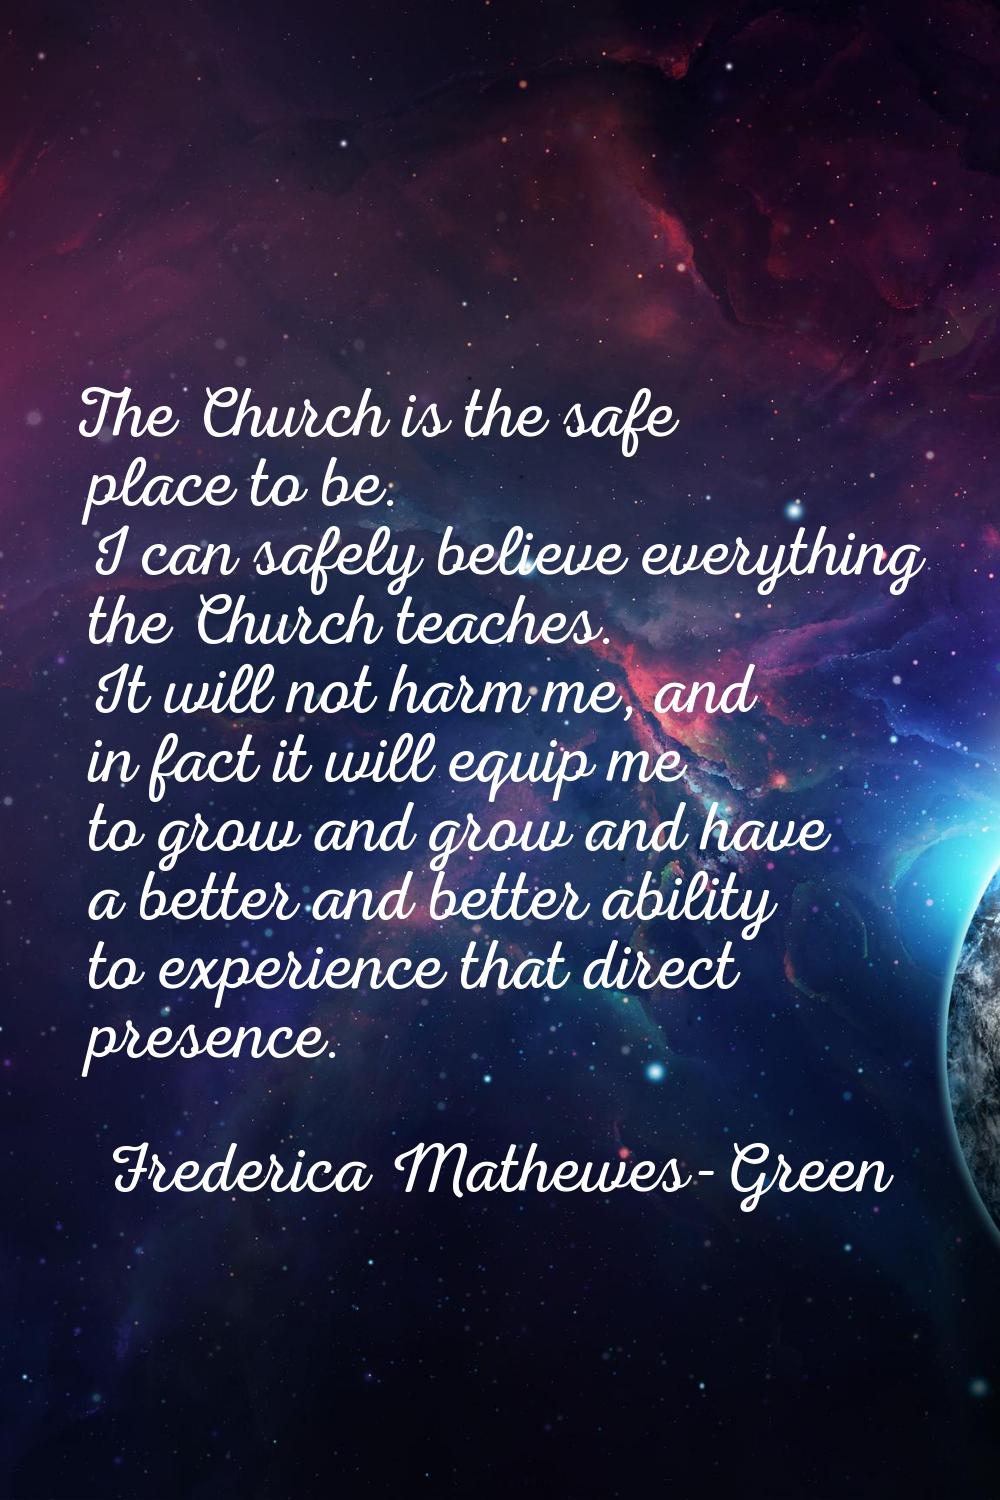 The Church is the safe place to be. I can safely believe everything the Church teaches. It will not